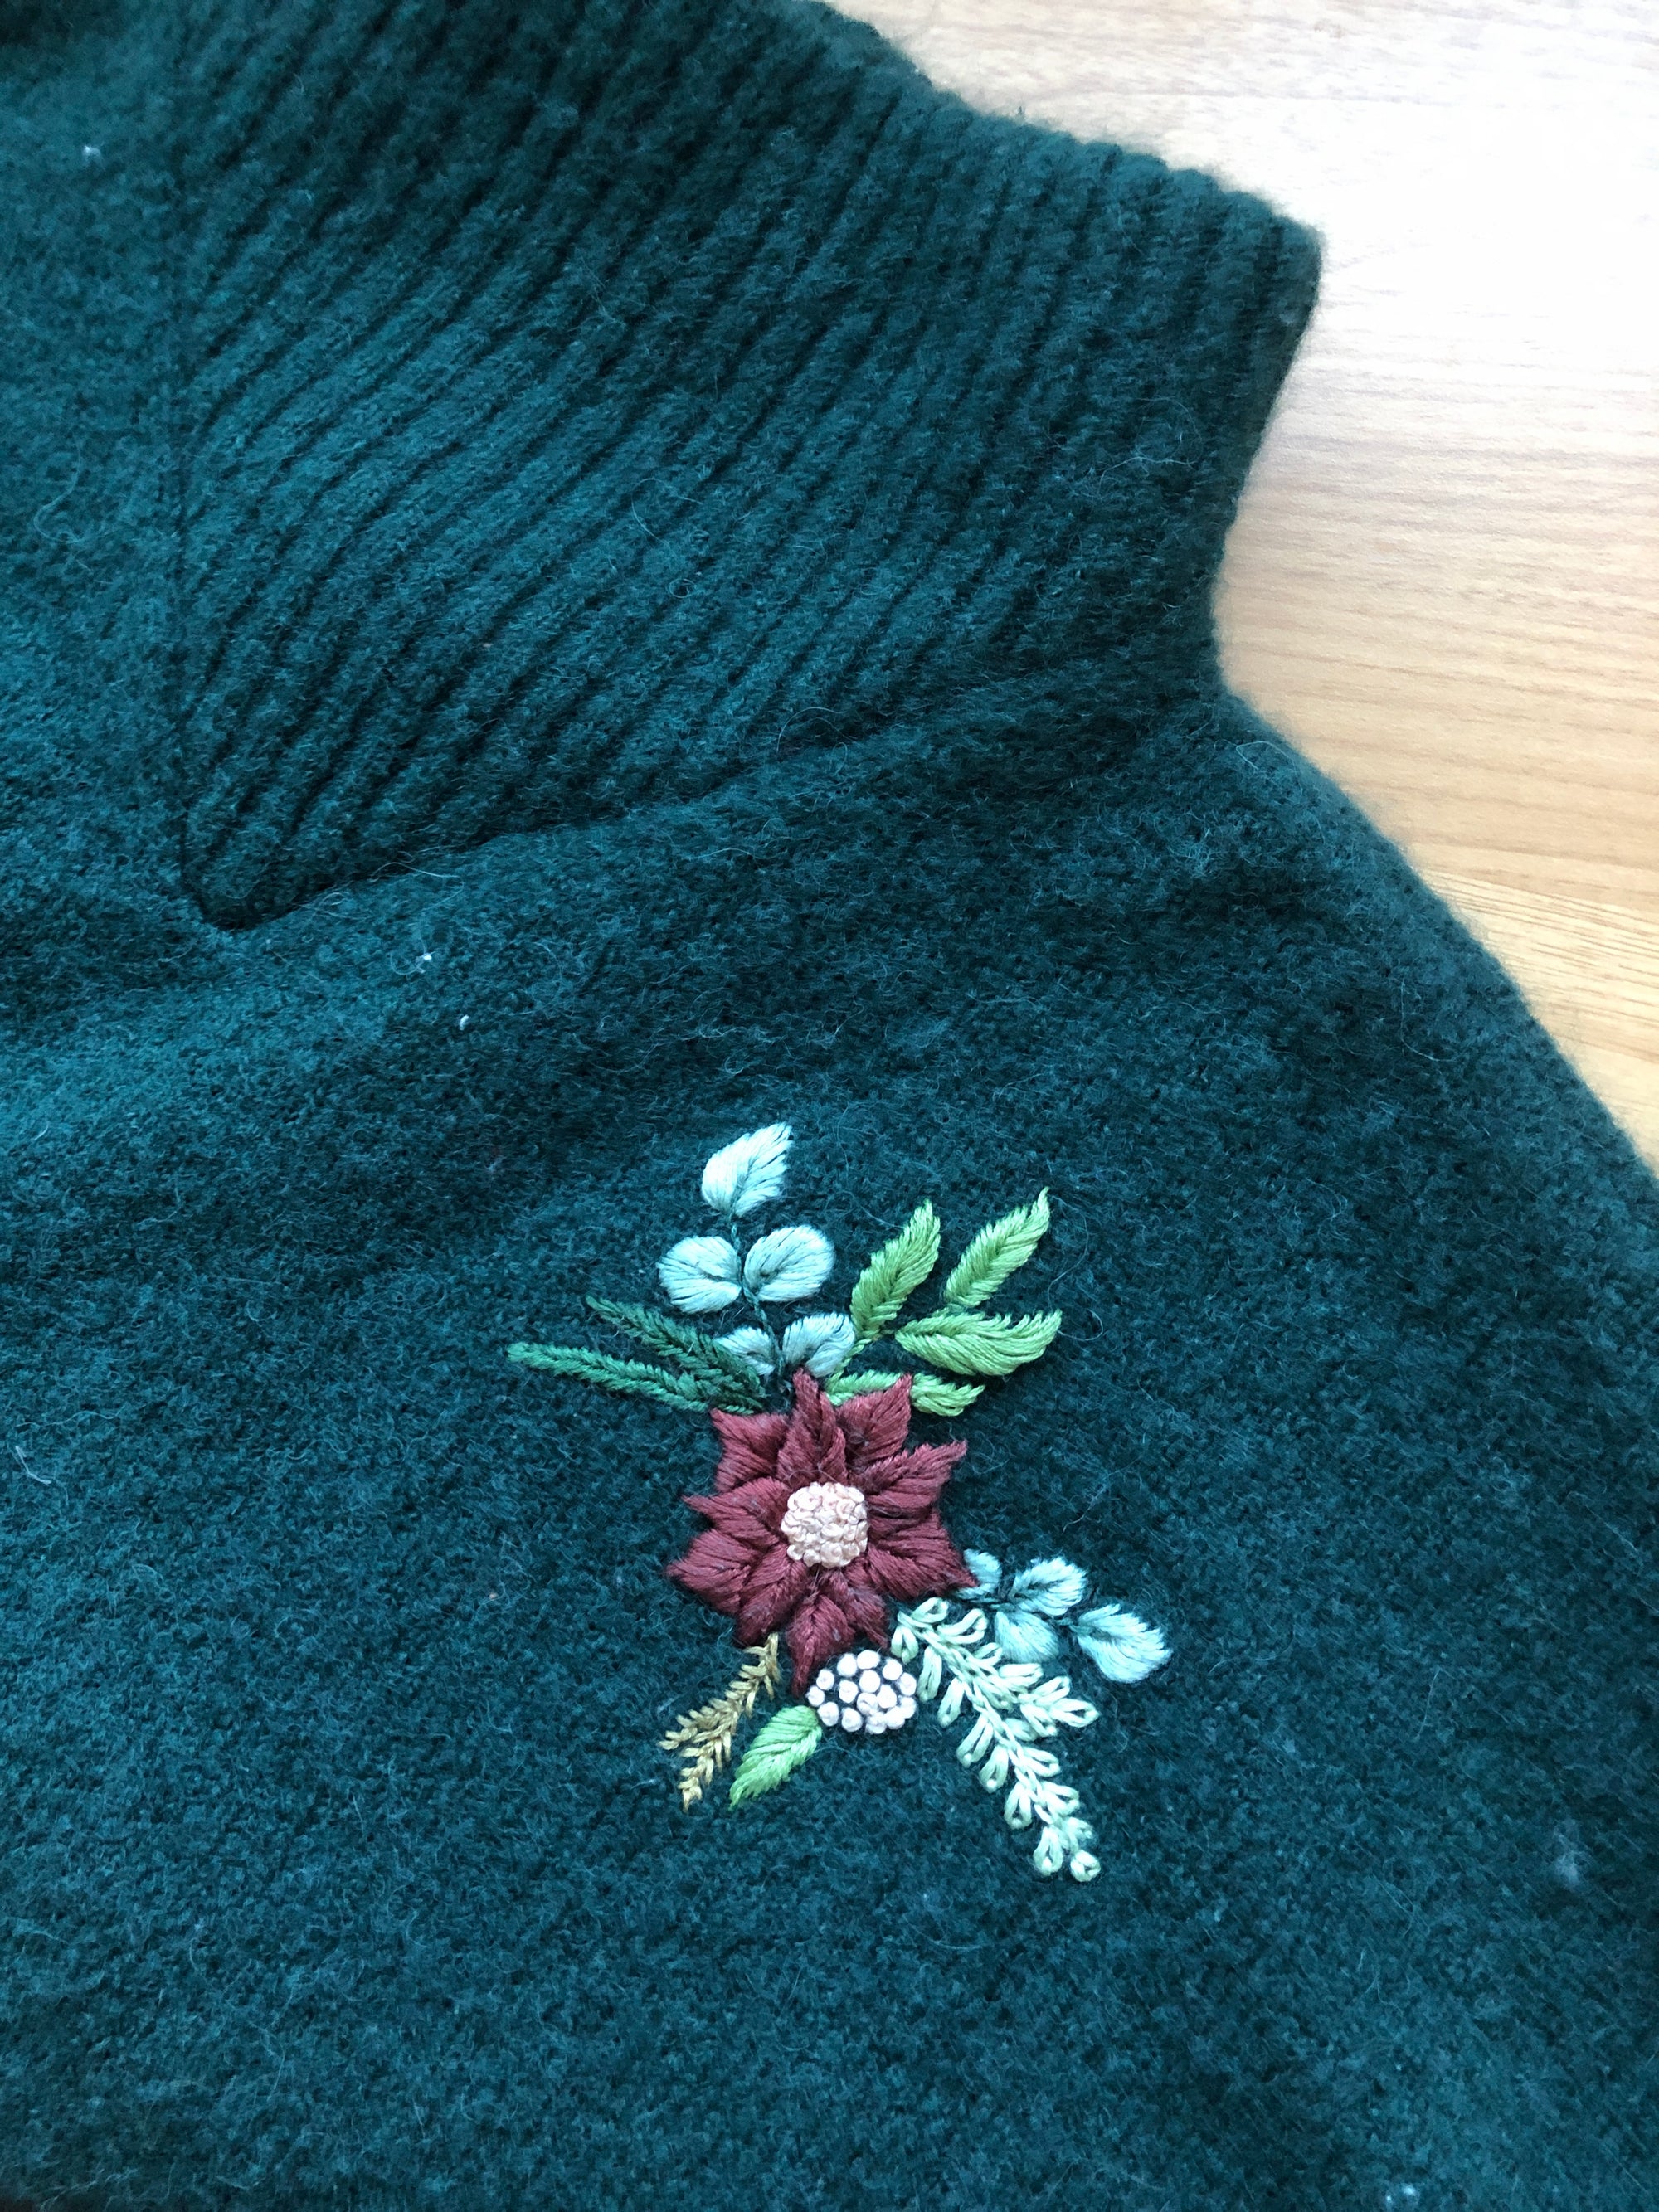 EMBROIDERY CLASS: Stitch A Holiday Sweater